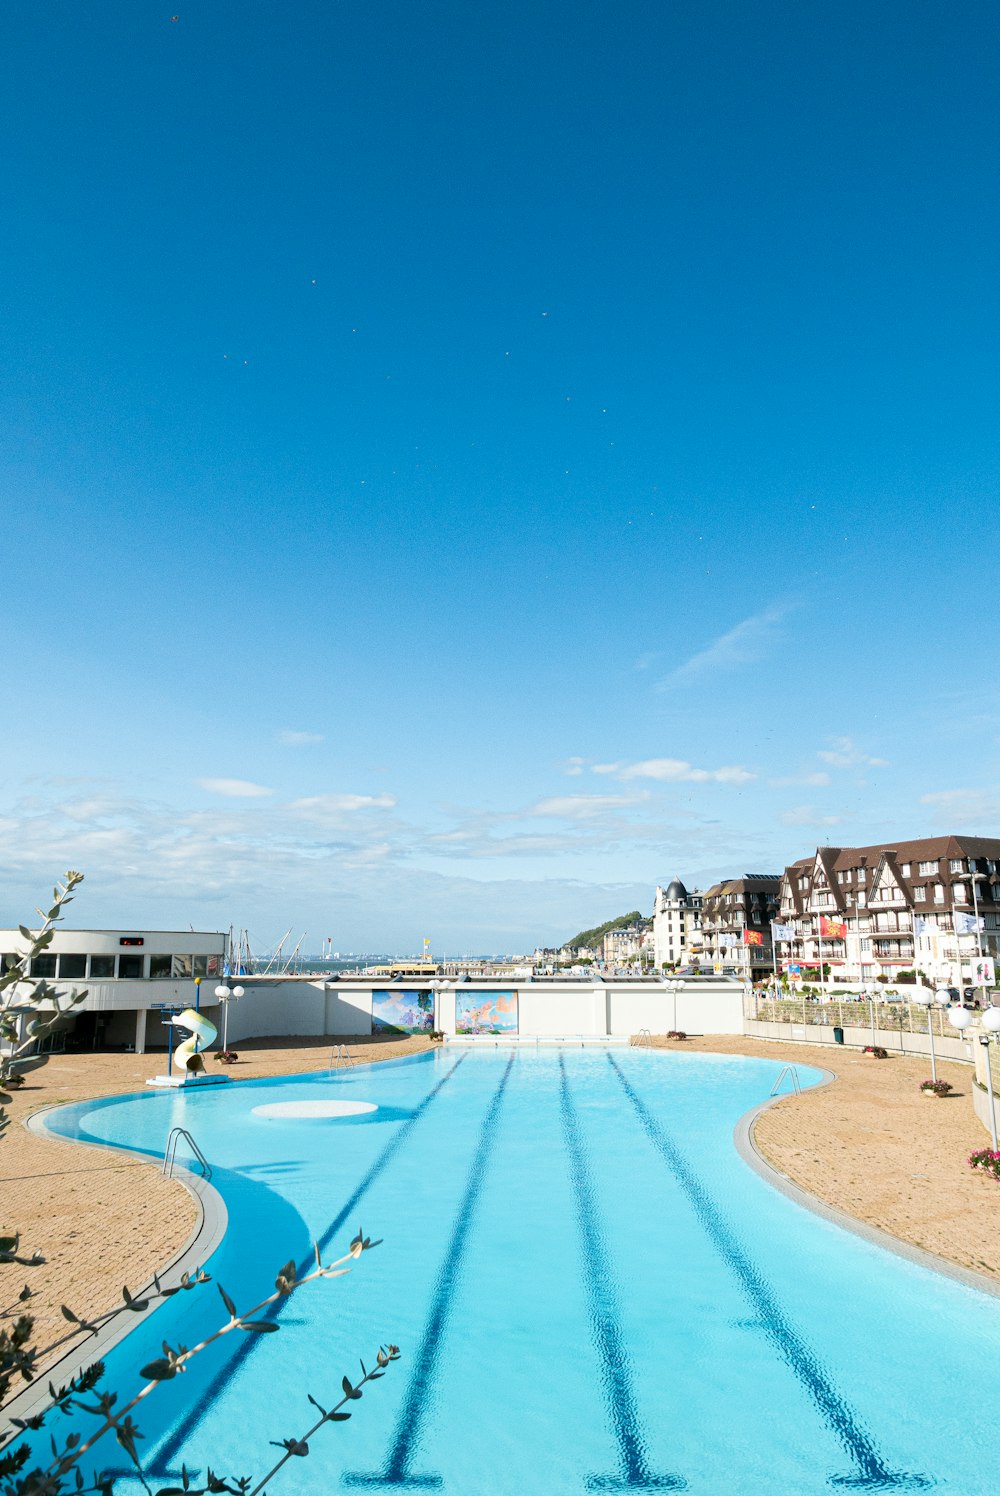 a large swimming pool in the middle of a beach